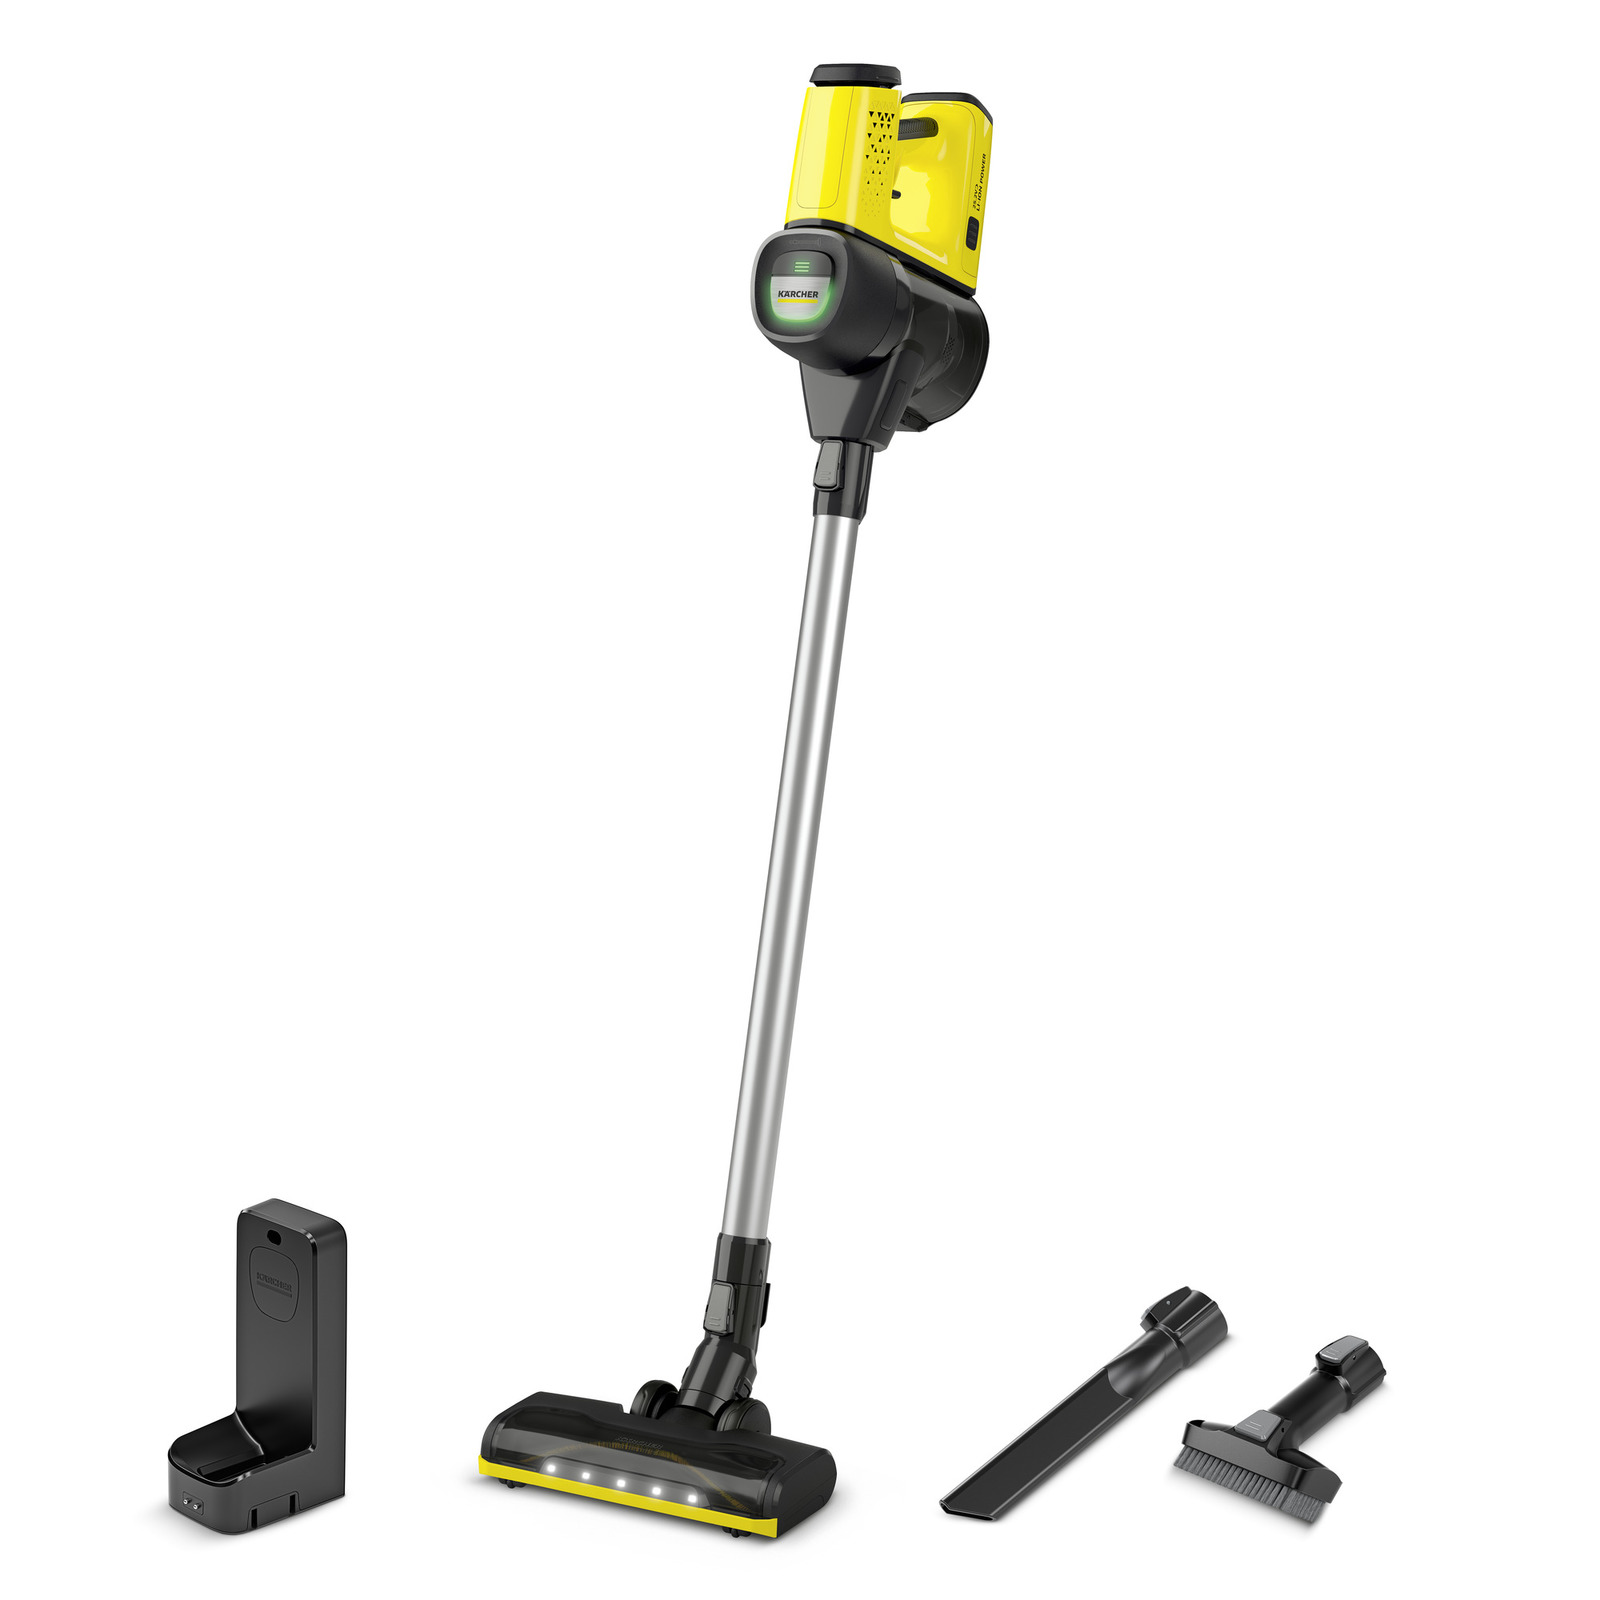 Пылесос Karcher VC 6 Cordless ourFamily (1.198-660.0 ) karcher пылесос беспроводной vc 6 cordless ourfamily car 1 198 672 0